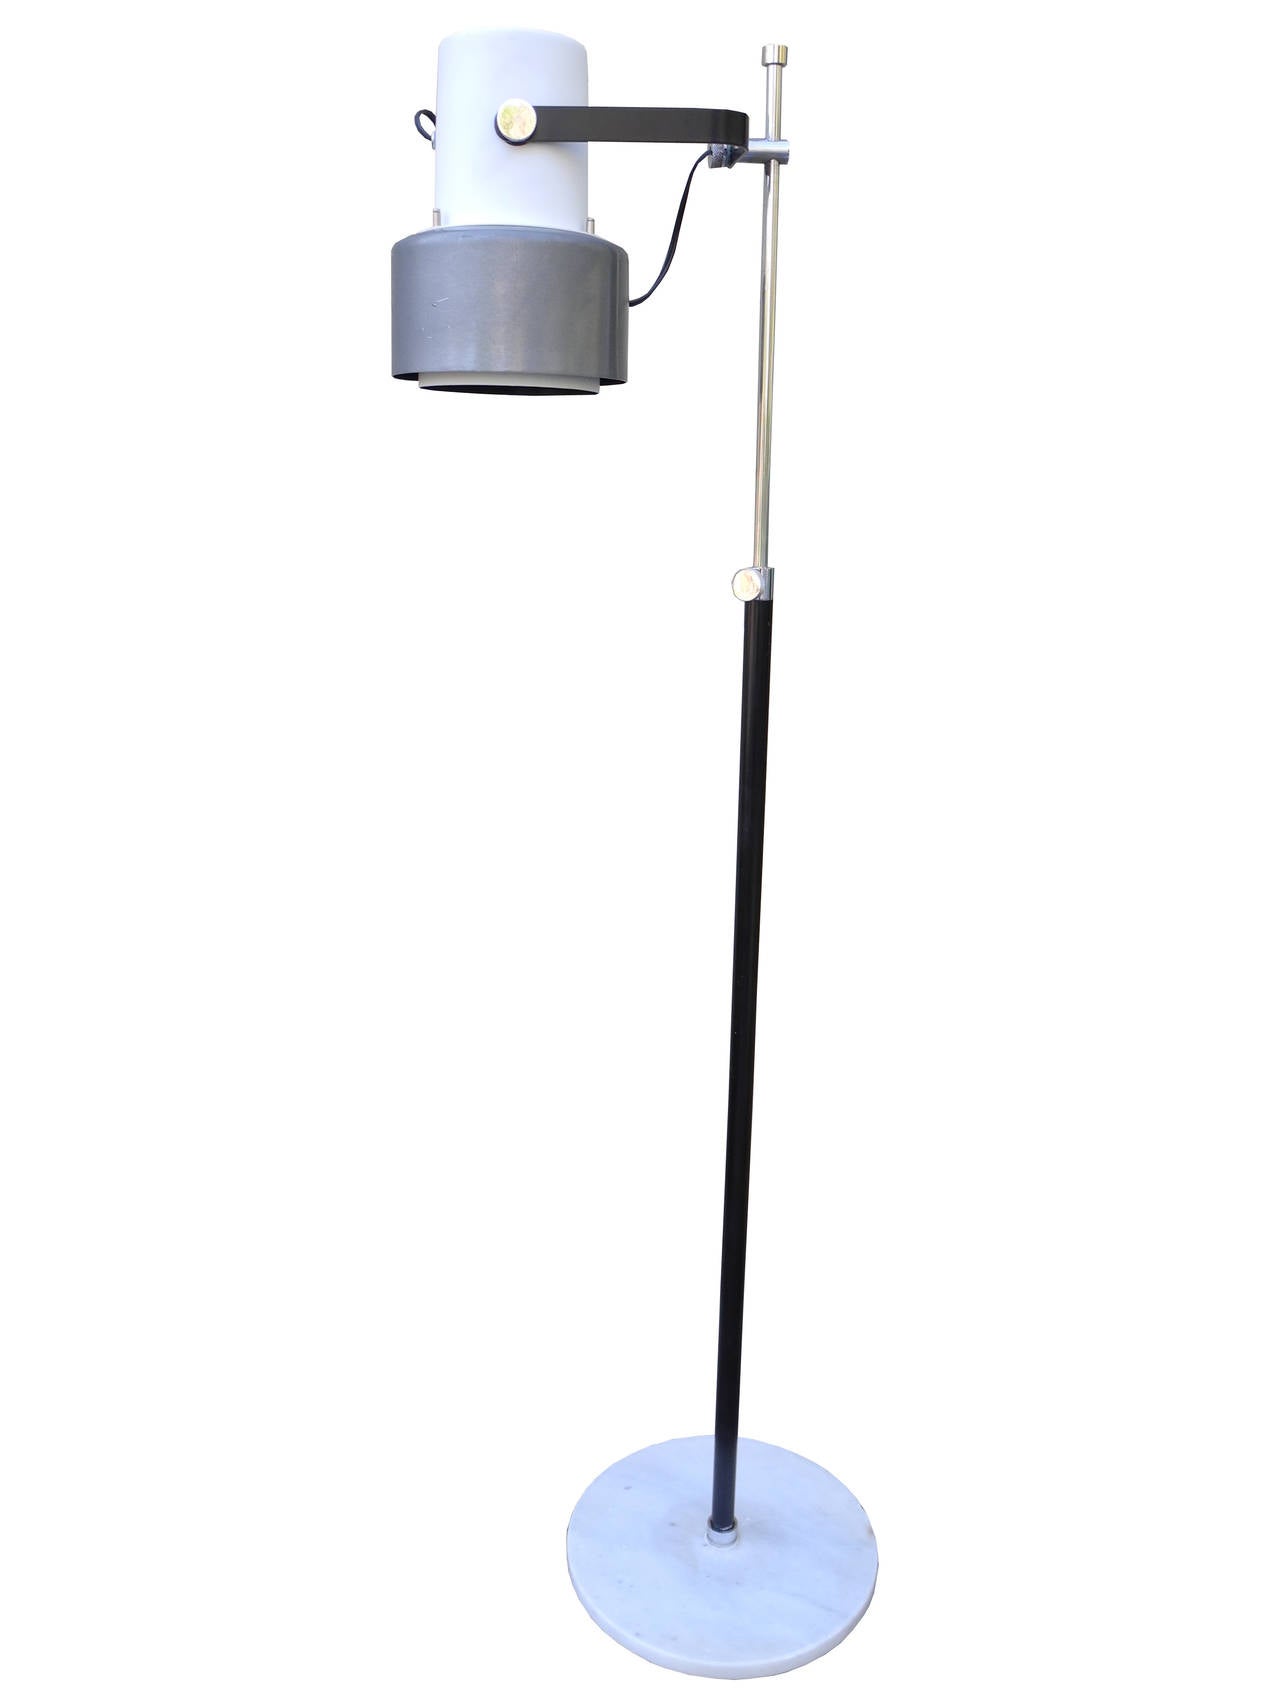 This vintage, made in Italy, floor lamp is in the style of Louis Poulsen. The base is made of marble and the shade of spun aluminum. The center rod is chromed steel. The shade moves up and down the rod and pivots as well. 100 watt bulb